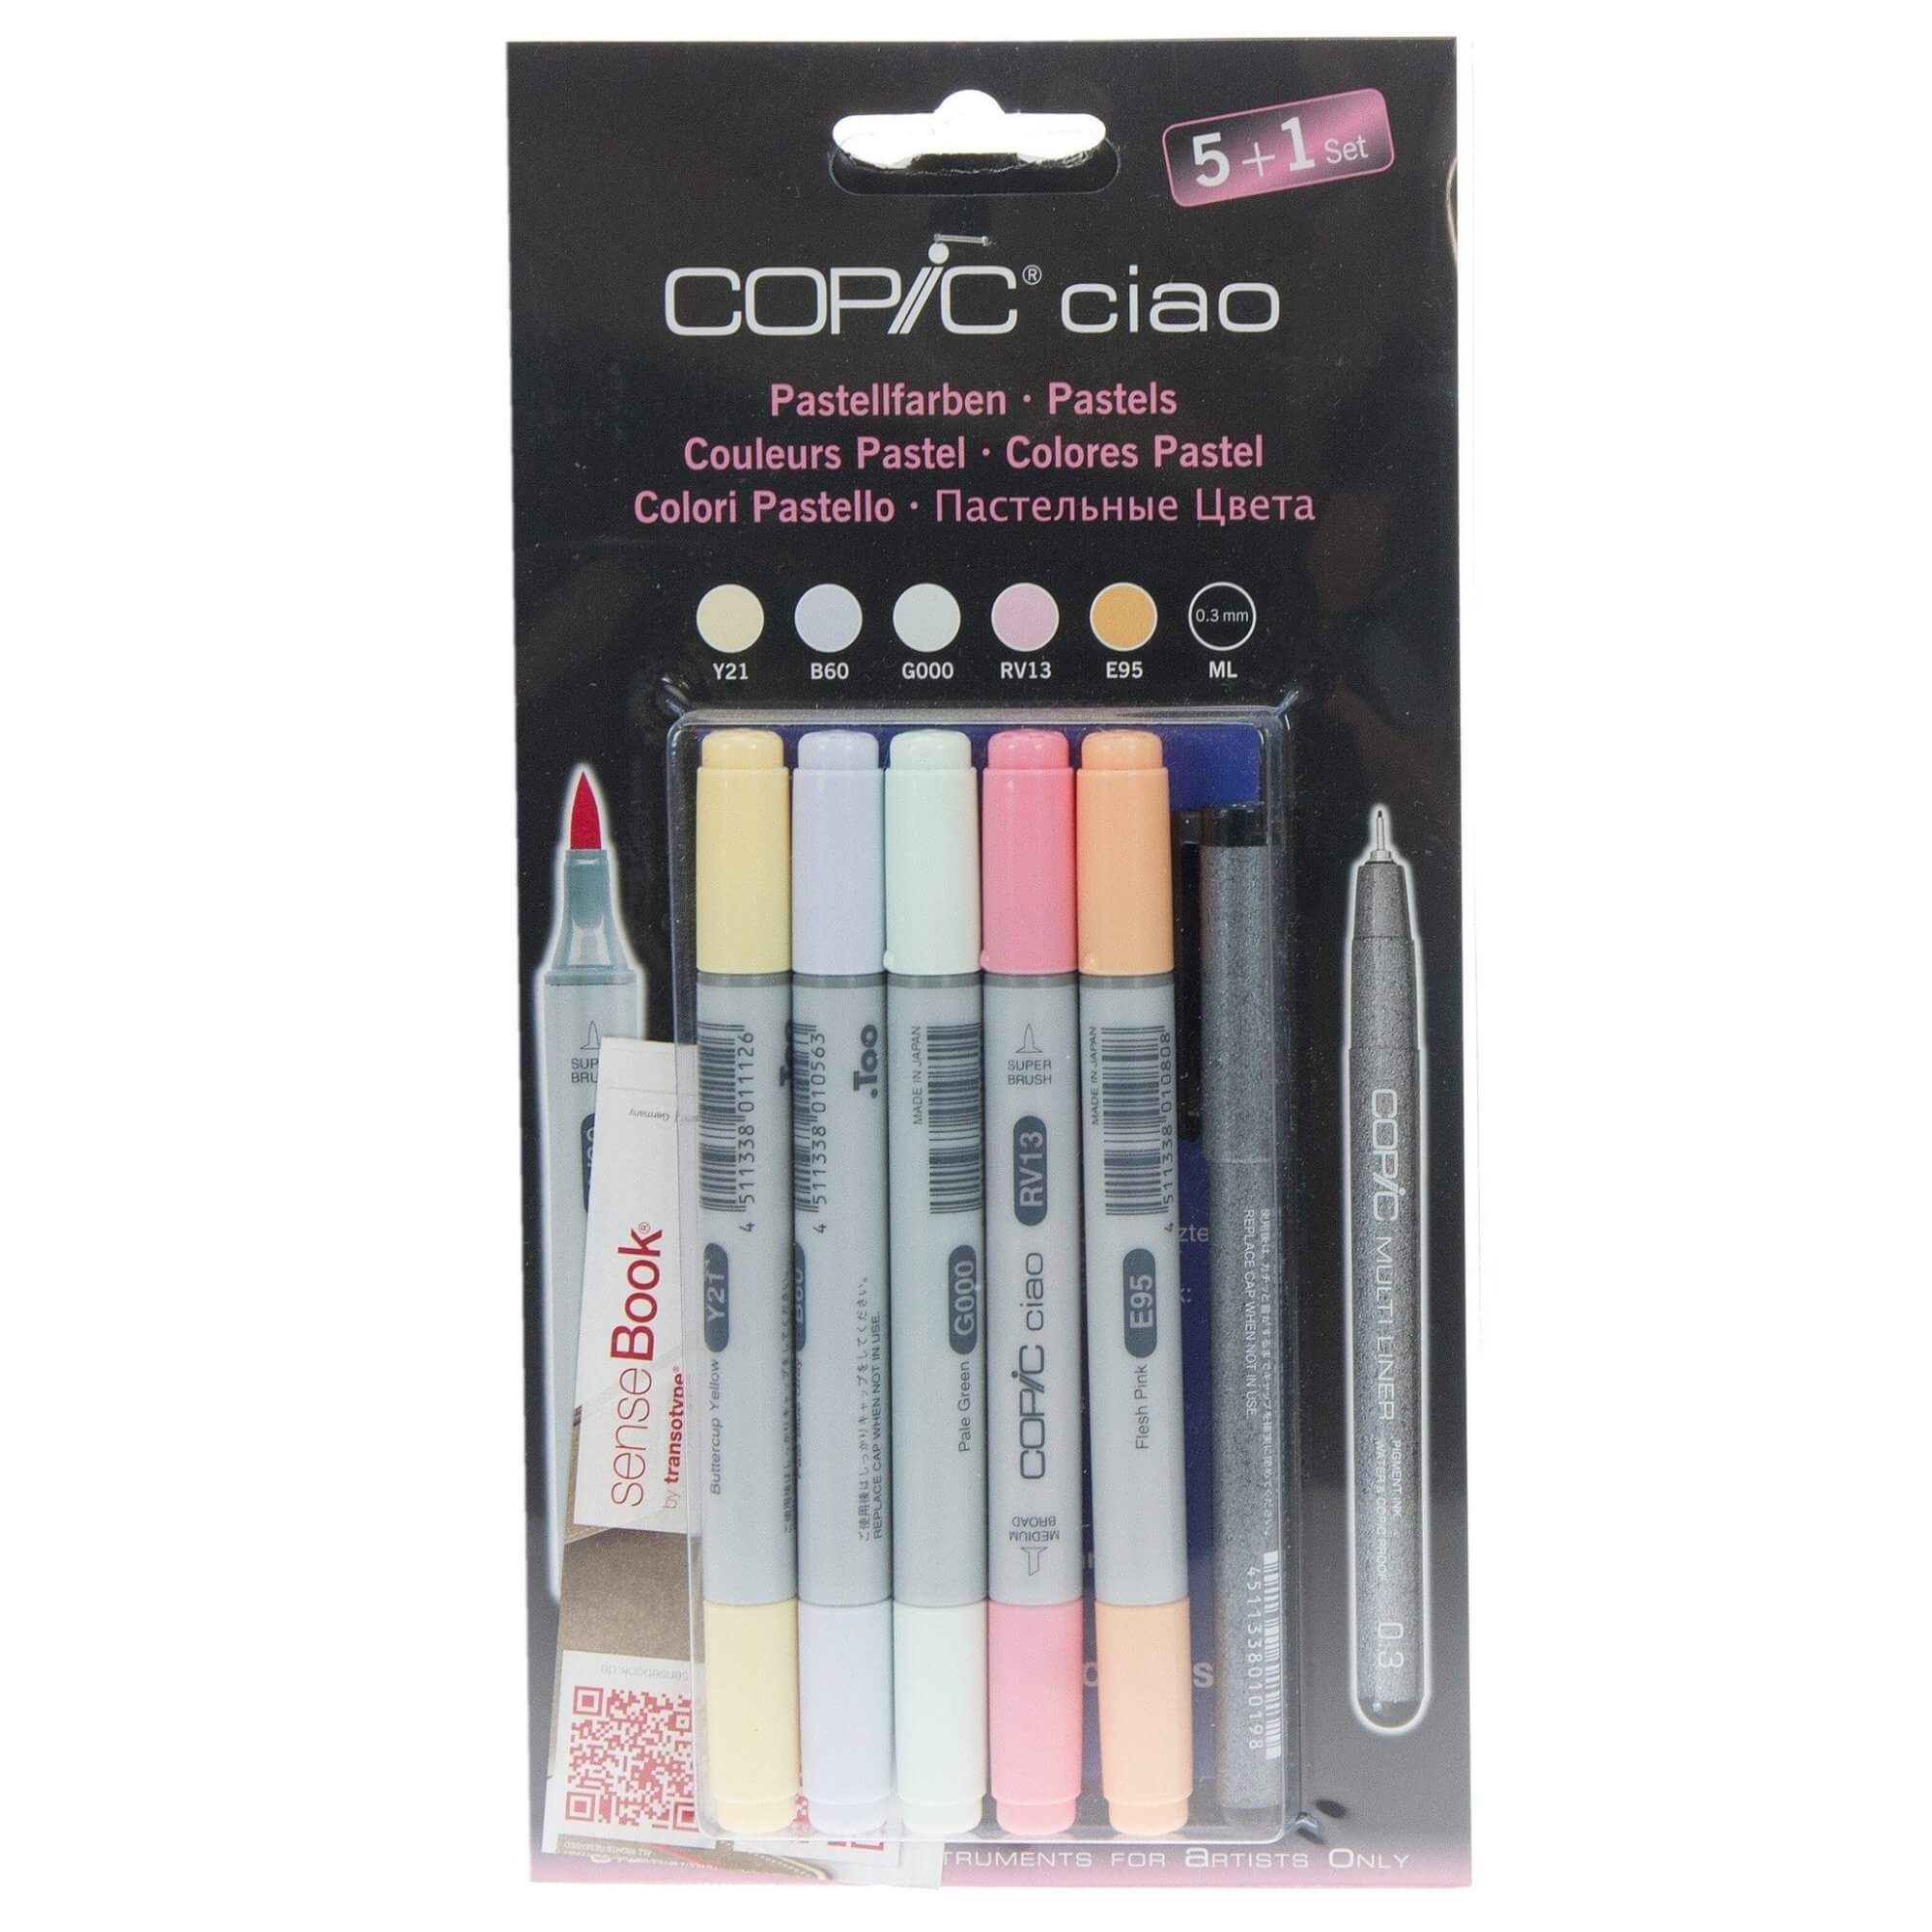 COPIC Ciao Marker 5+1 Pastel Set